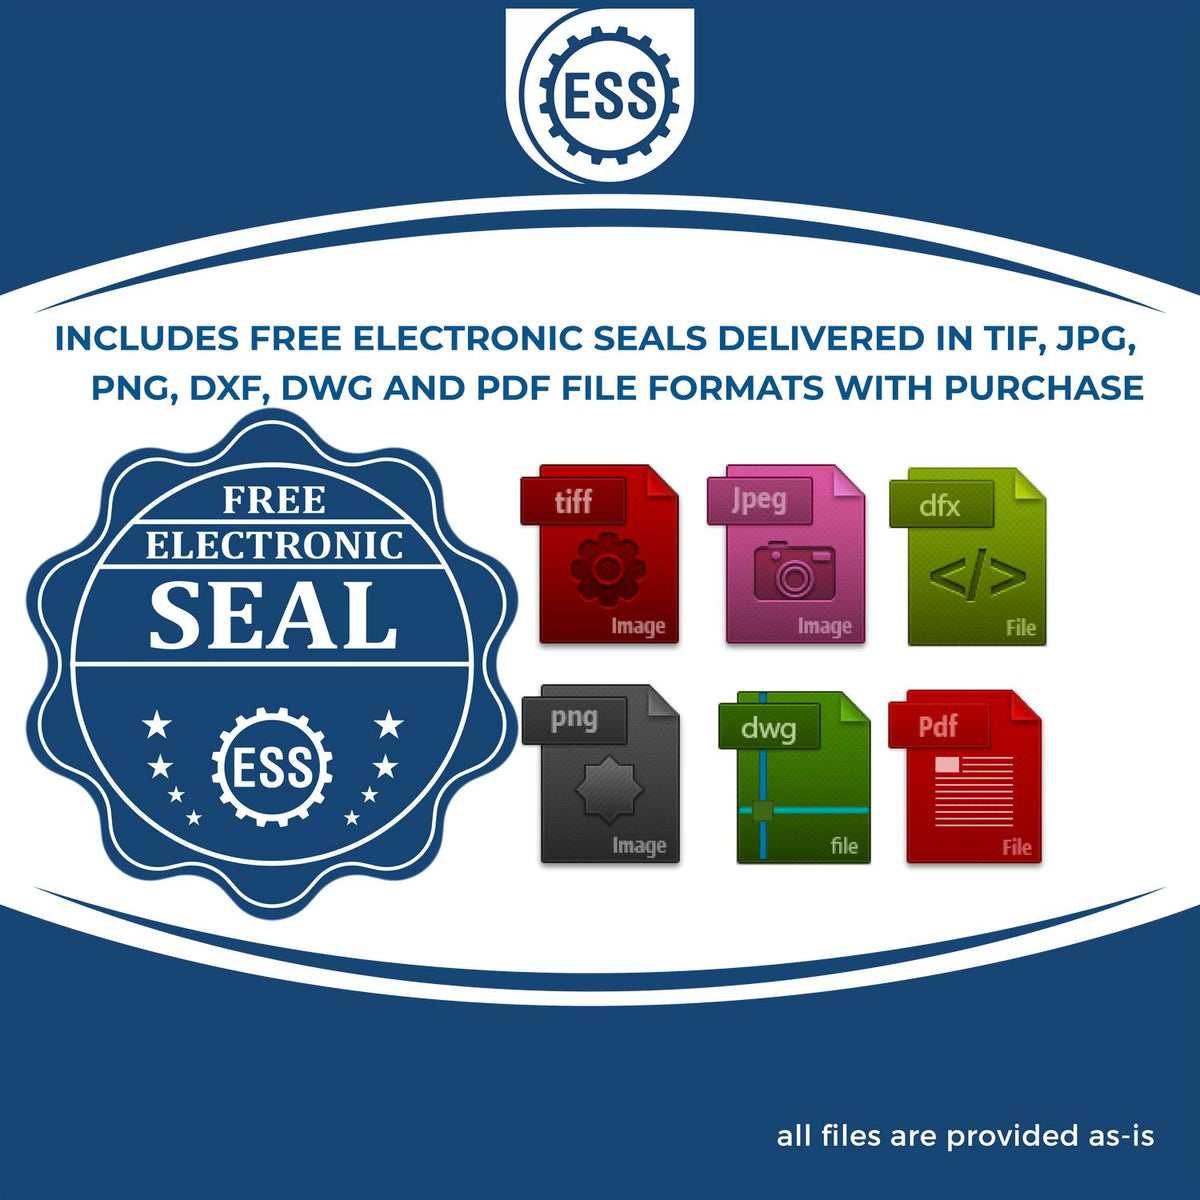 An infographic for the free electronic seal for the Gift Alaska Architect Seal illustrating the different file type icons such as DXF, DWG, TIF, JPG and PNG.